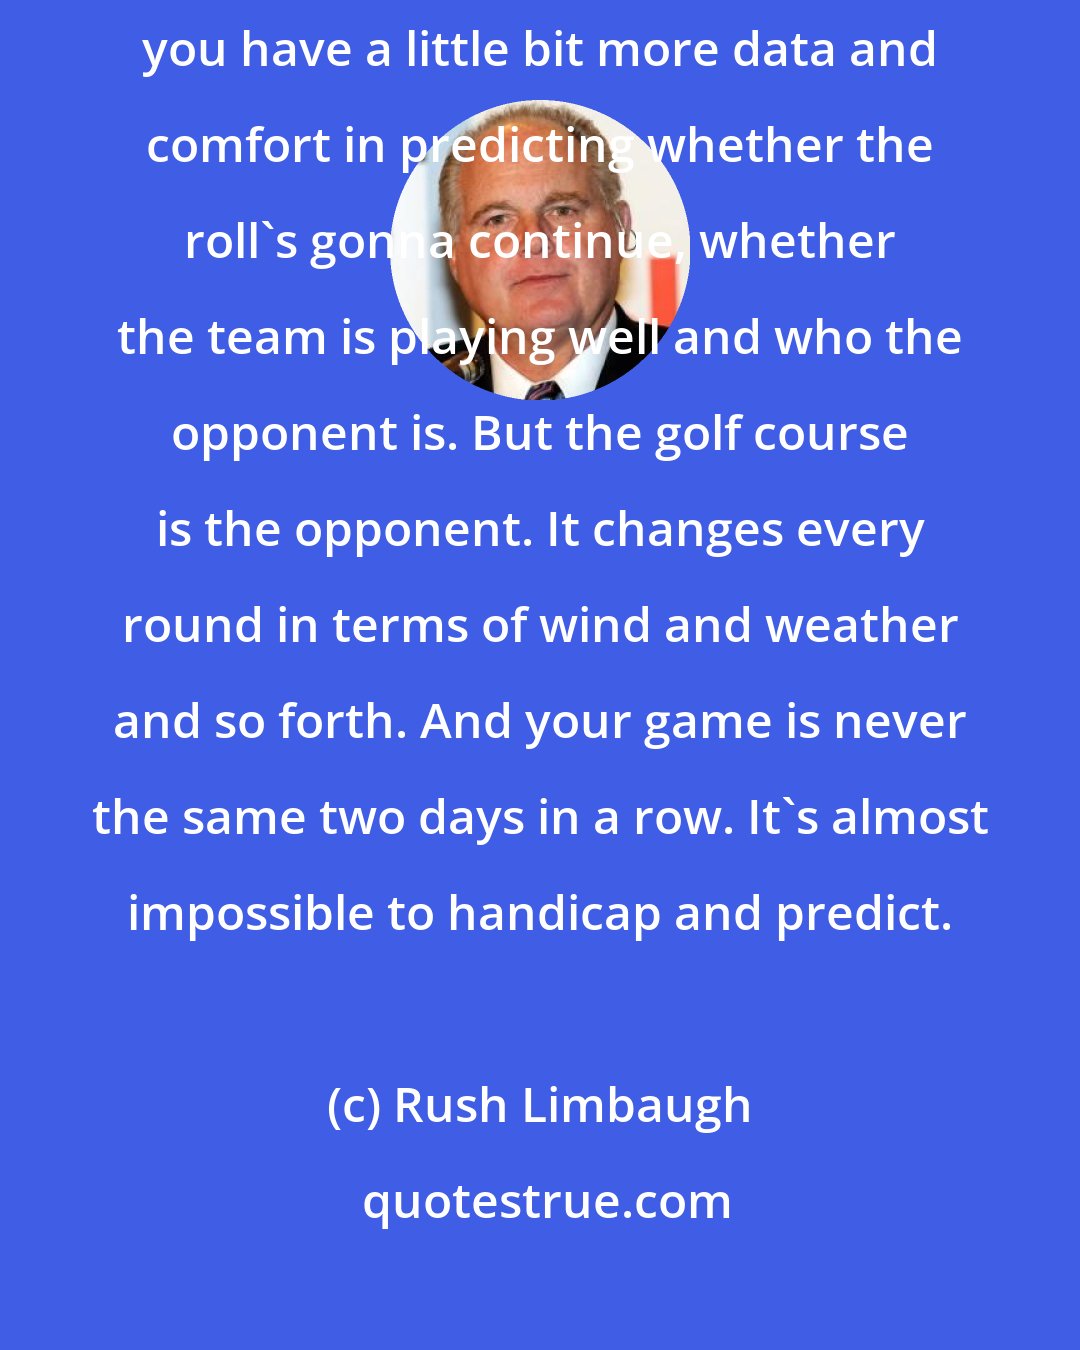 Rush Limbaugh: That's the thing about golf. In a team sport, when a team's on a roll, you have a little bit more data and comfort in predicting whether the roll's gonna continue, whether the team is playing well and who the opponent is. But the golf course is the opponent. It changes every round in terms of wind and weather and so forth. And your game is never the same two days in a row. It's almost impossible to handicap and predict.